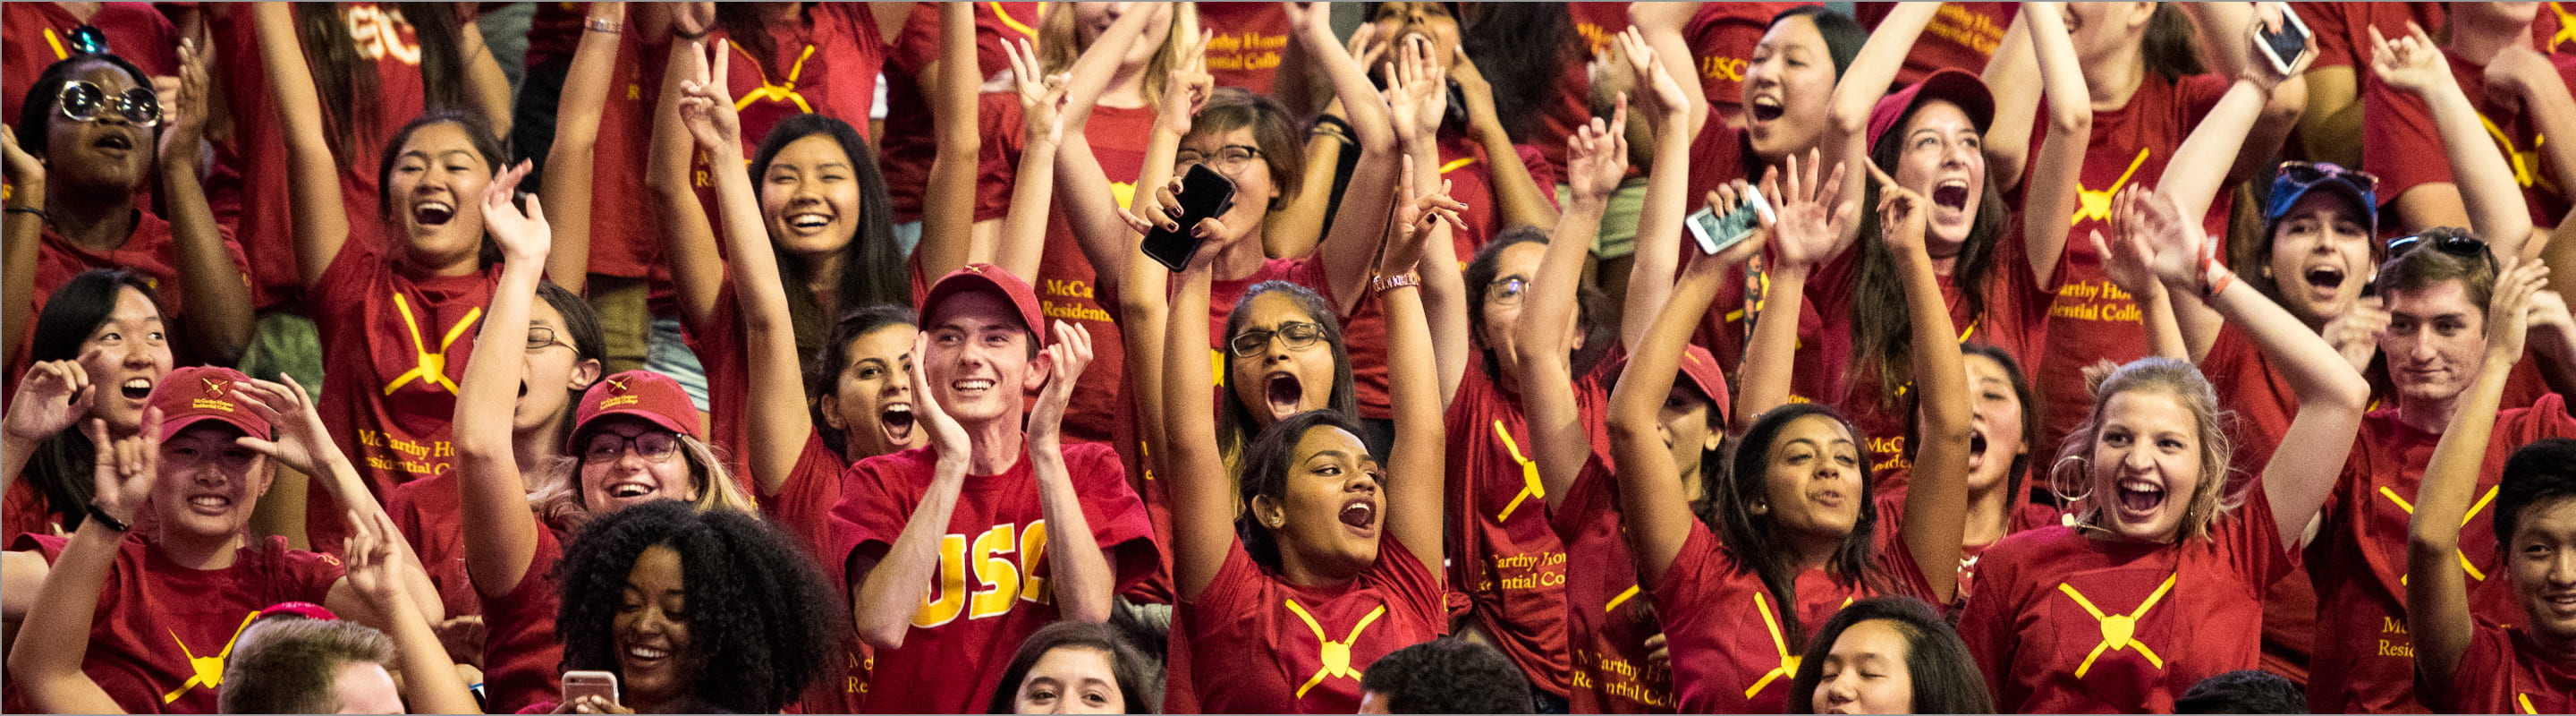 USC Athletics - Support the USC Trojans in one of the 21 varsity sports and help them Fight On!